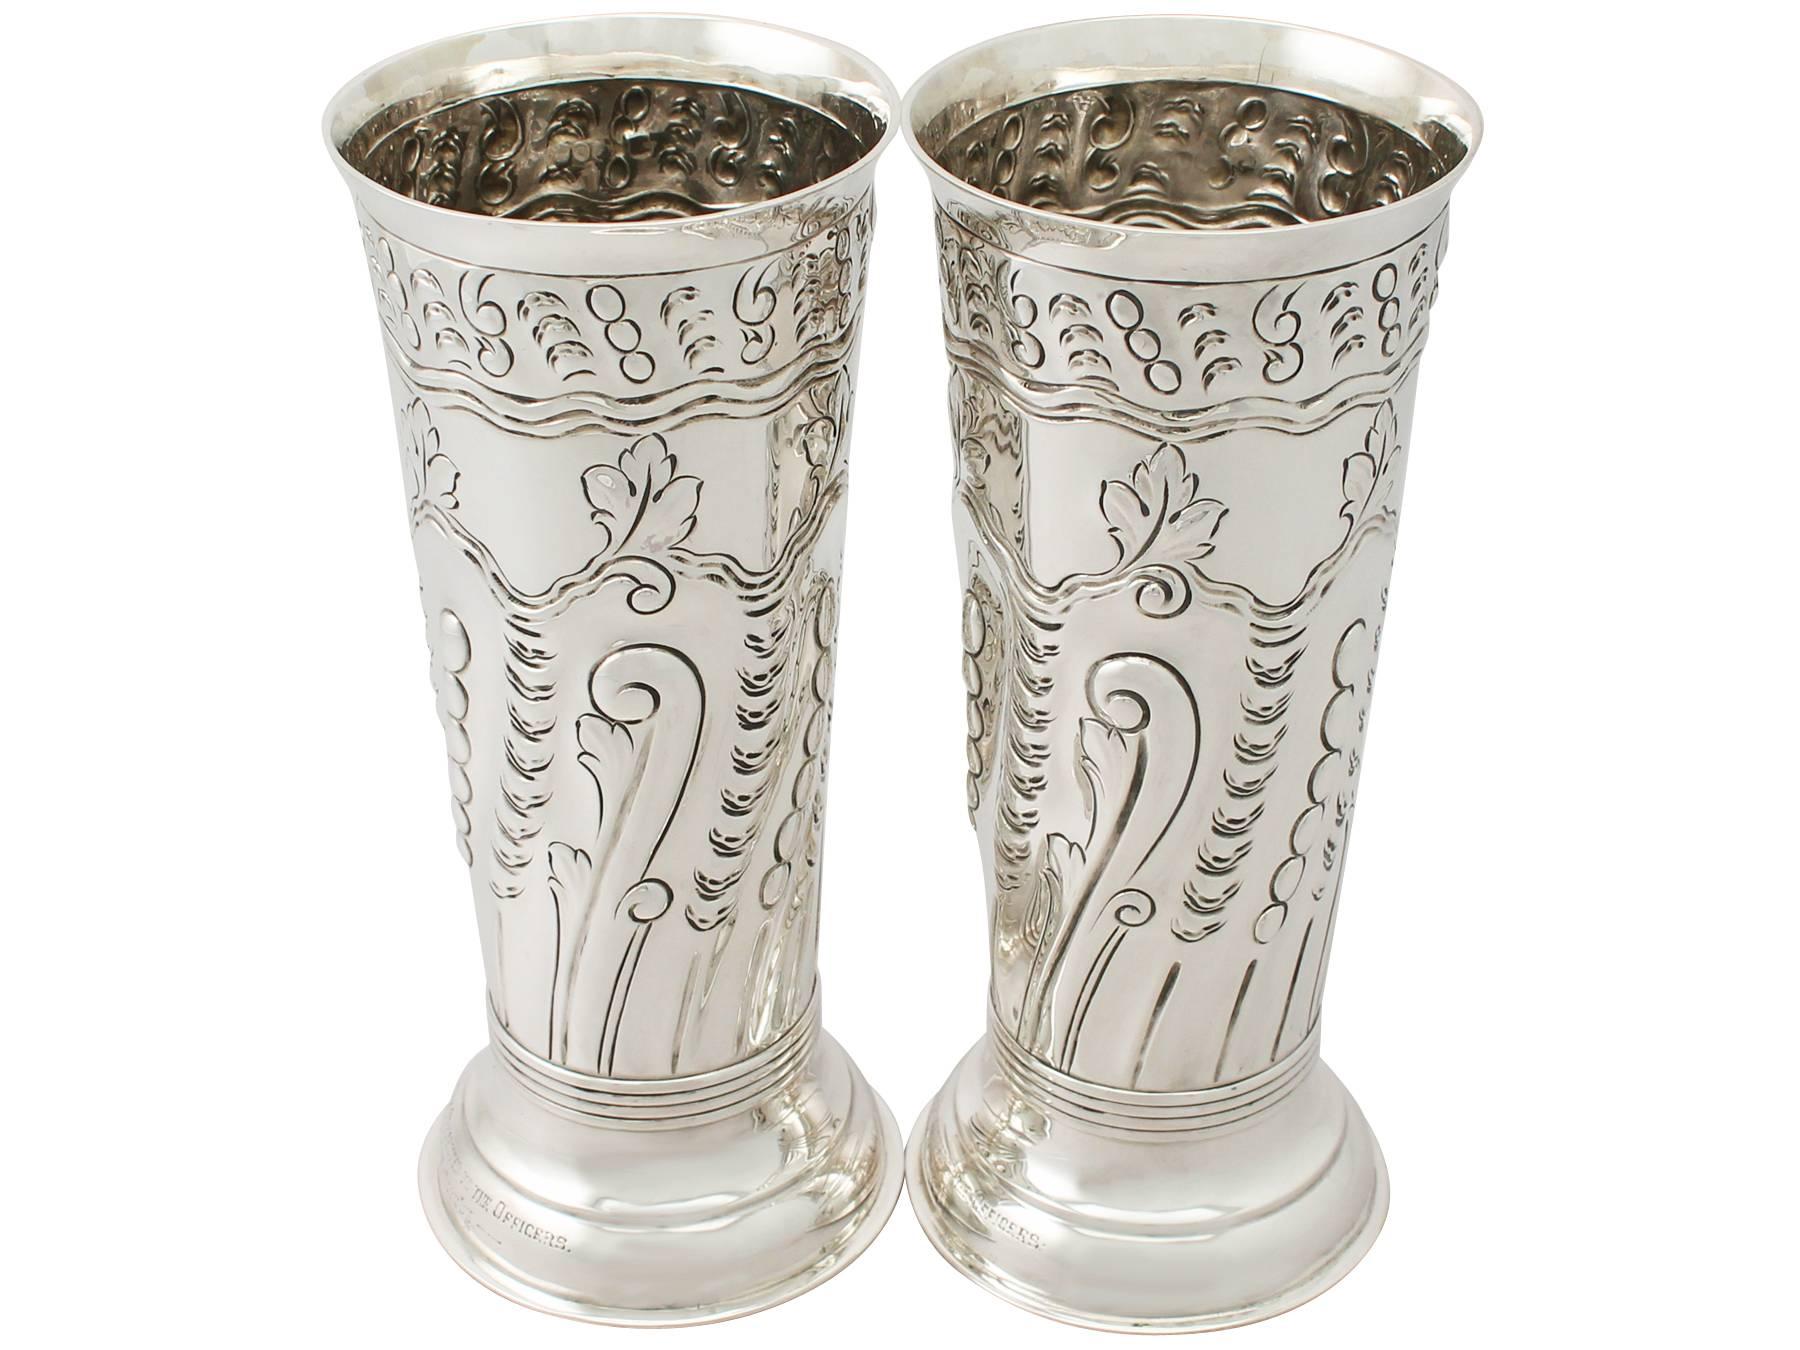 Great Britain (UK) Pair of Sterling Silver Vases/Centerpieces, Antique Victorian